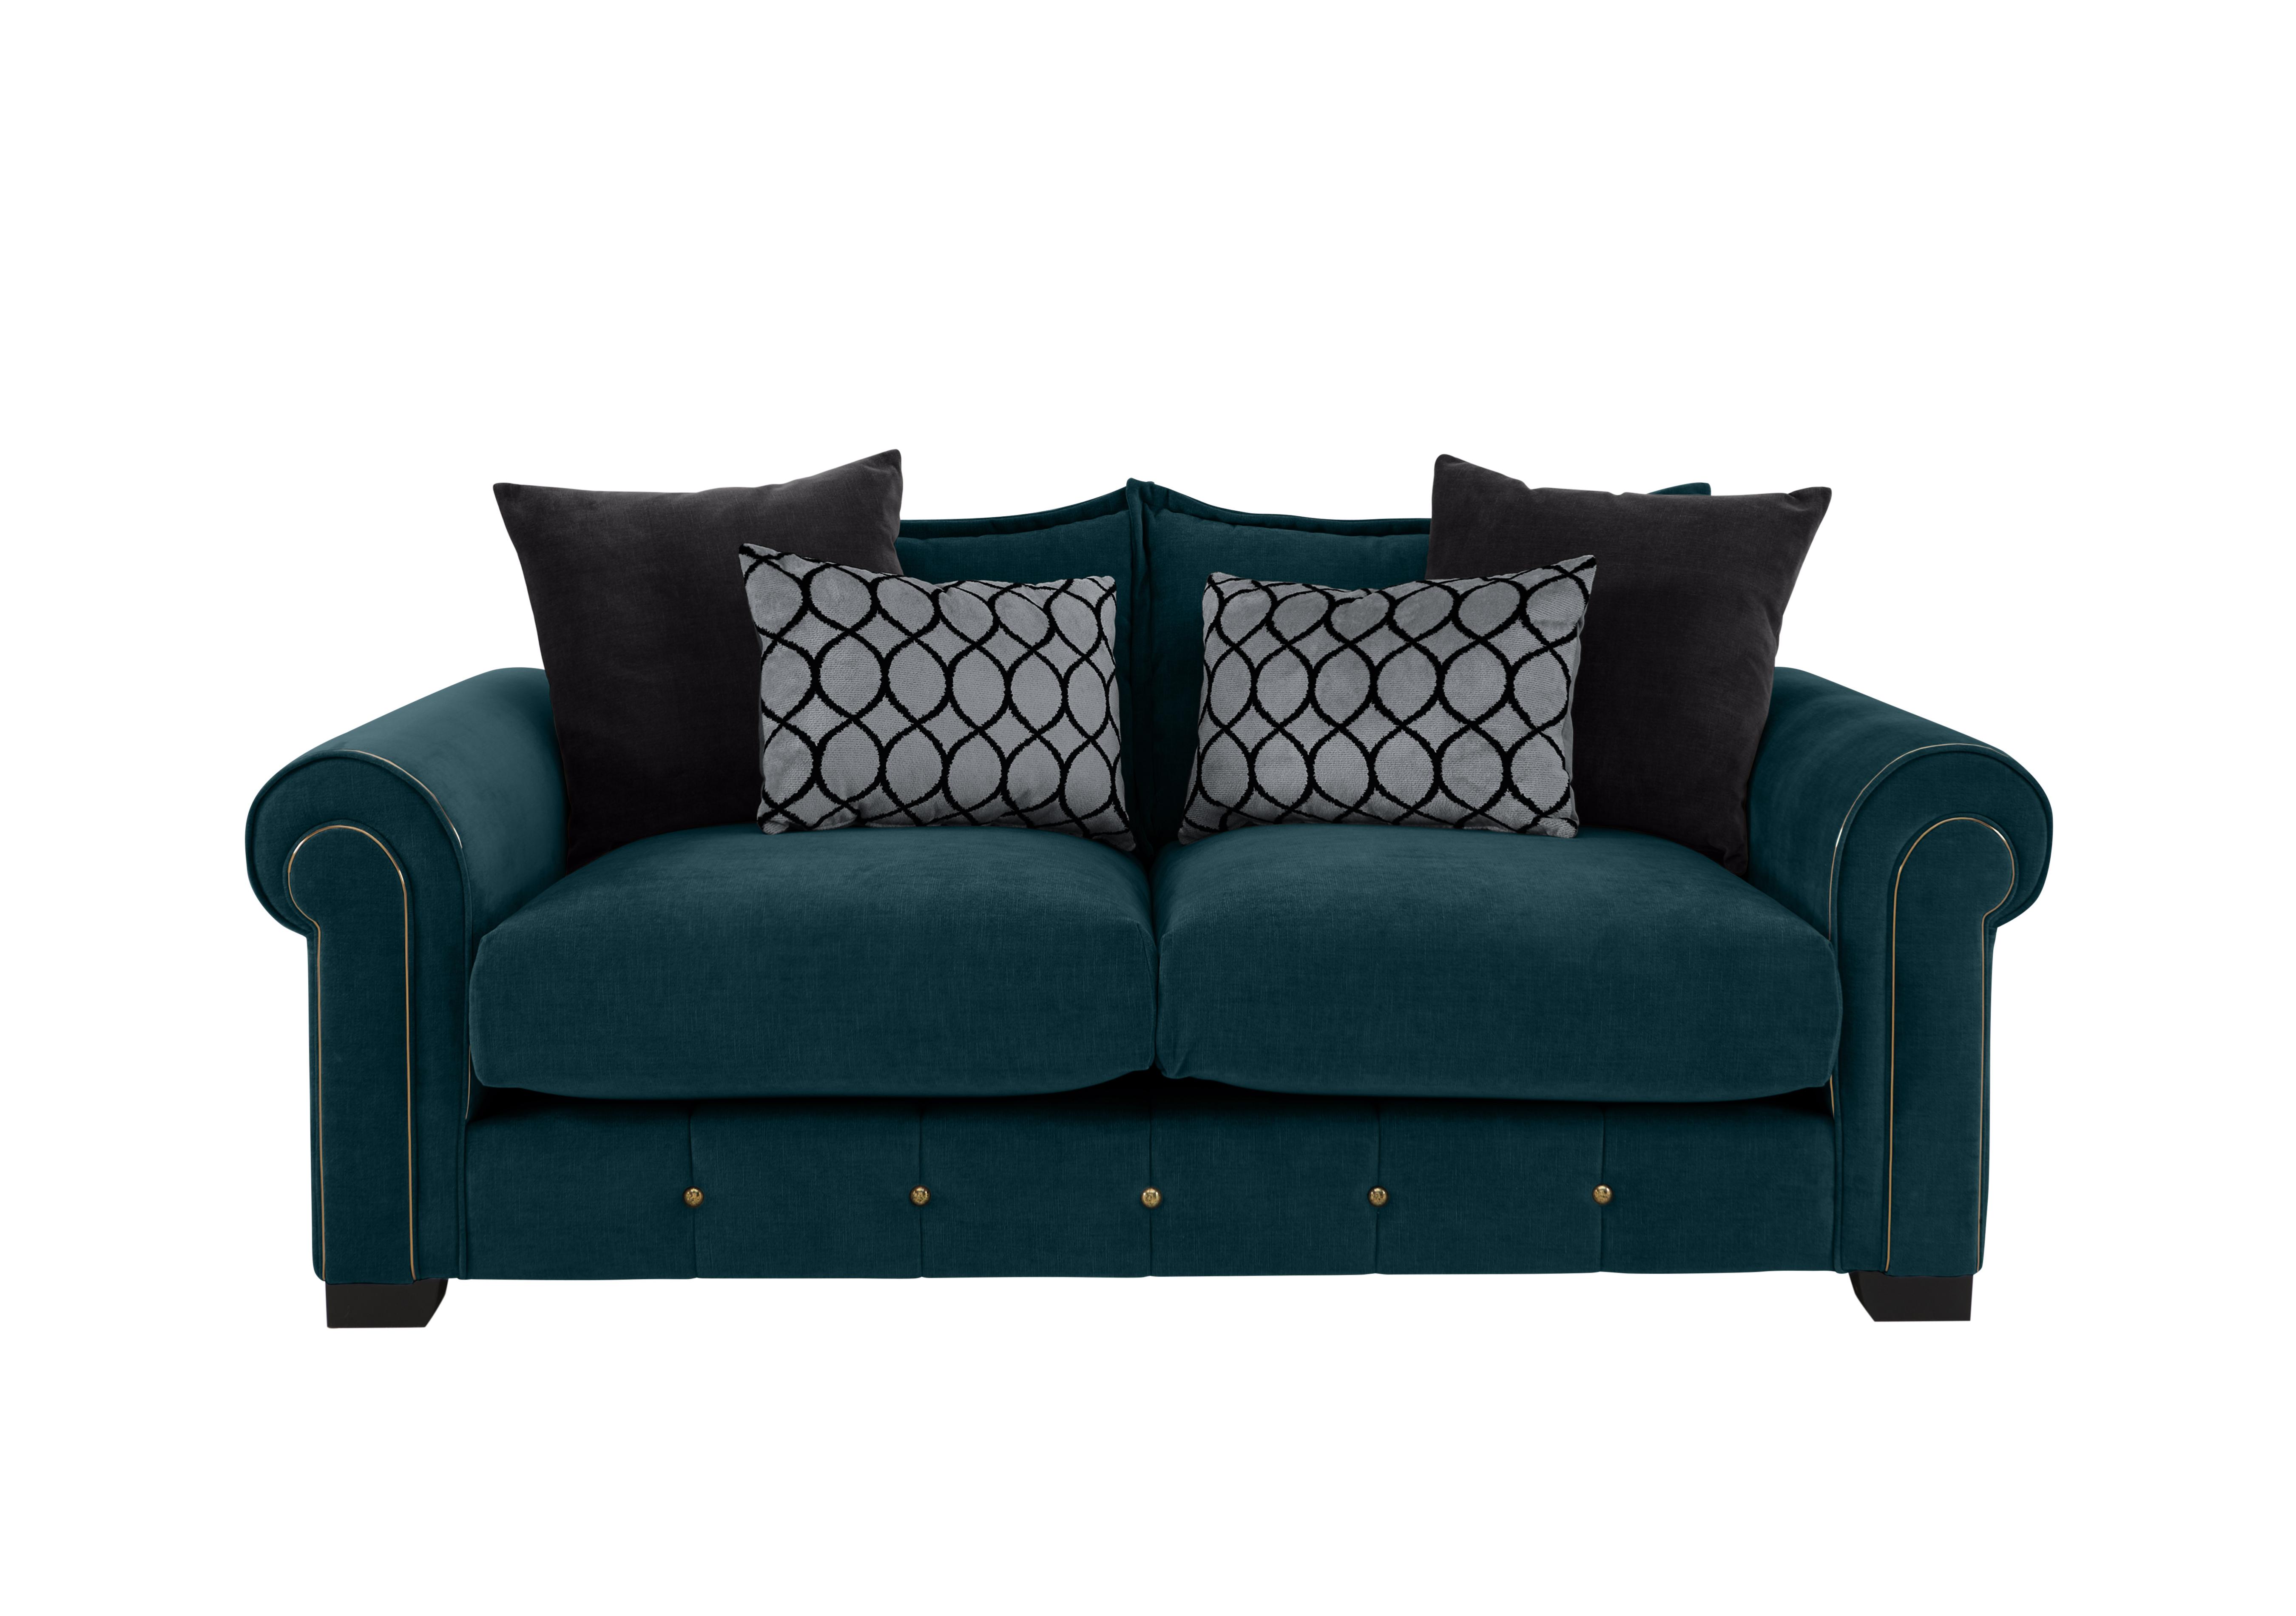 Sumptuous 3 Seater Fabric Sofa in Chamonix Teal Dk/Gold on Furniture Village